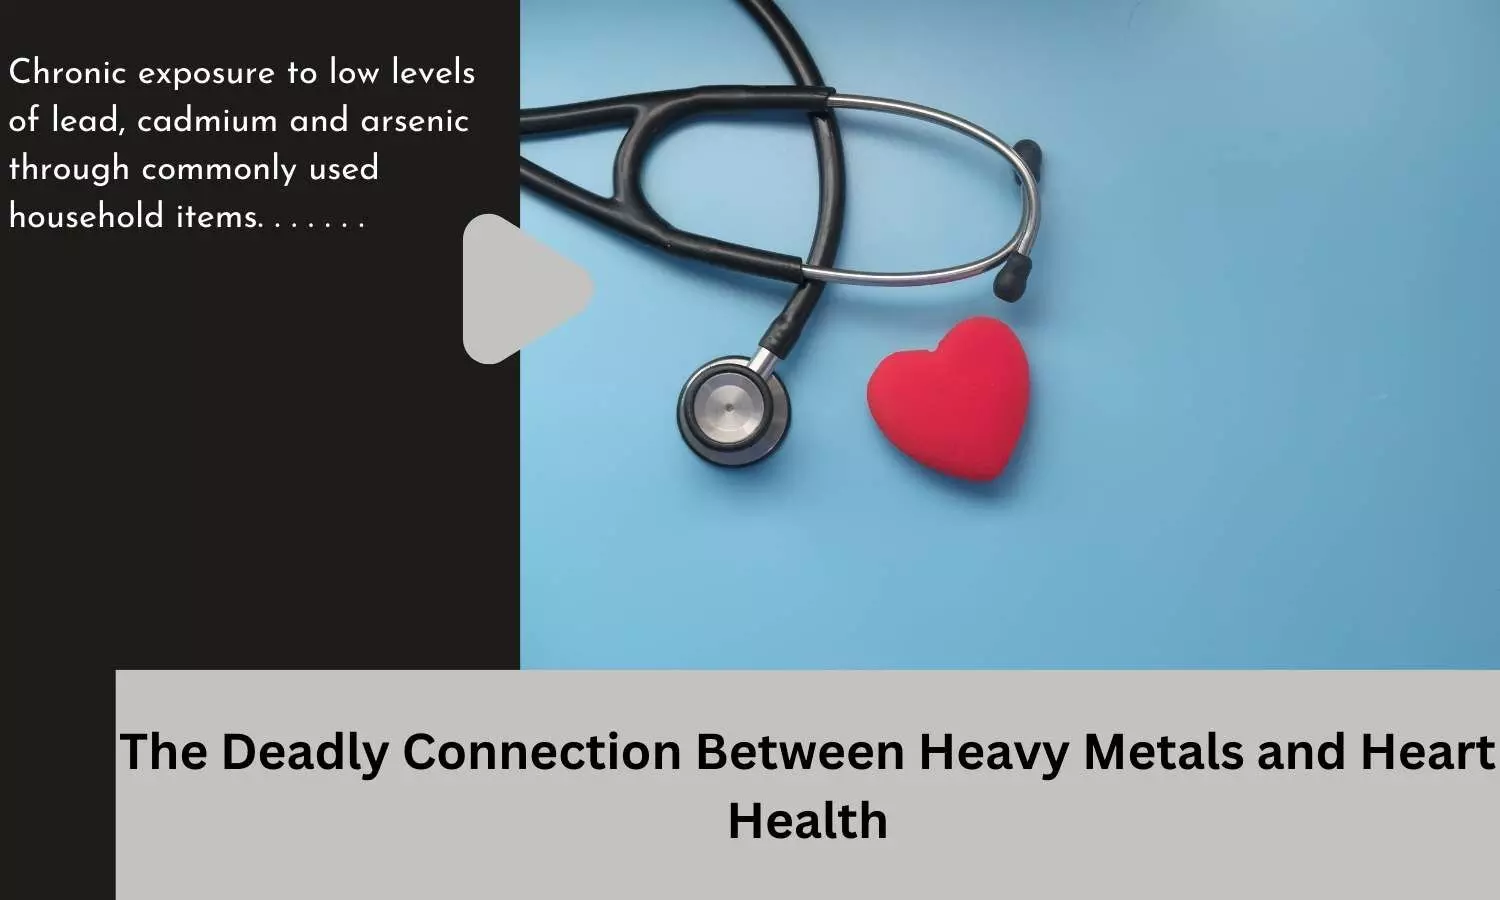 The Deadly Connection Between Heavy Metals and Heart Health